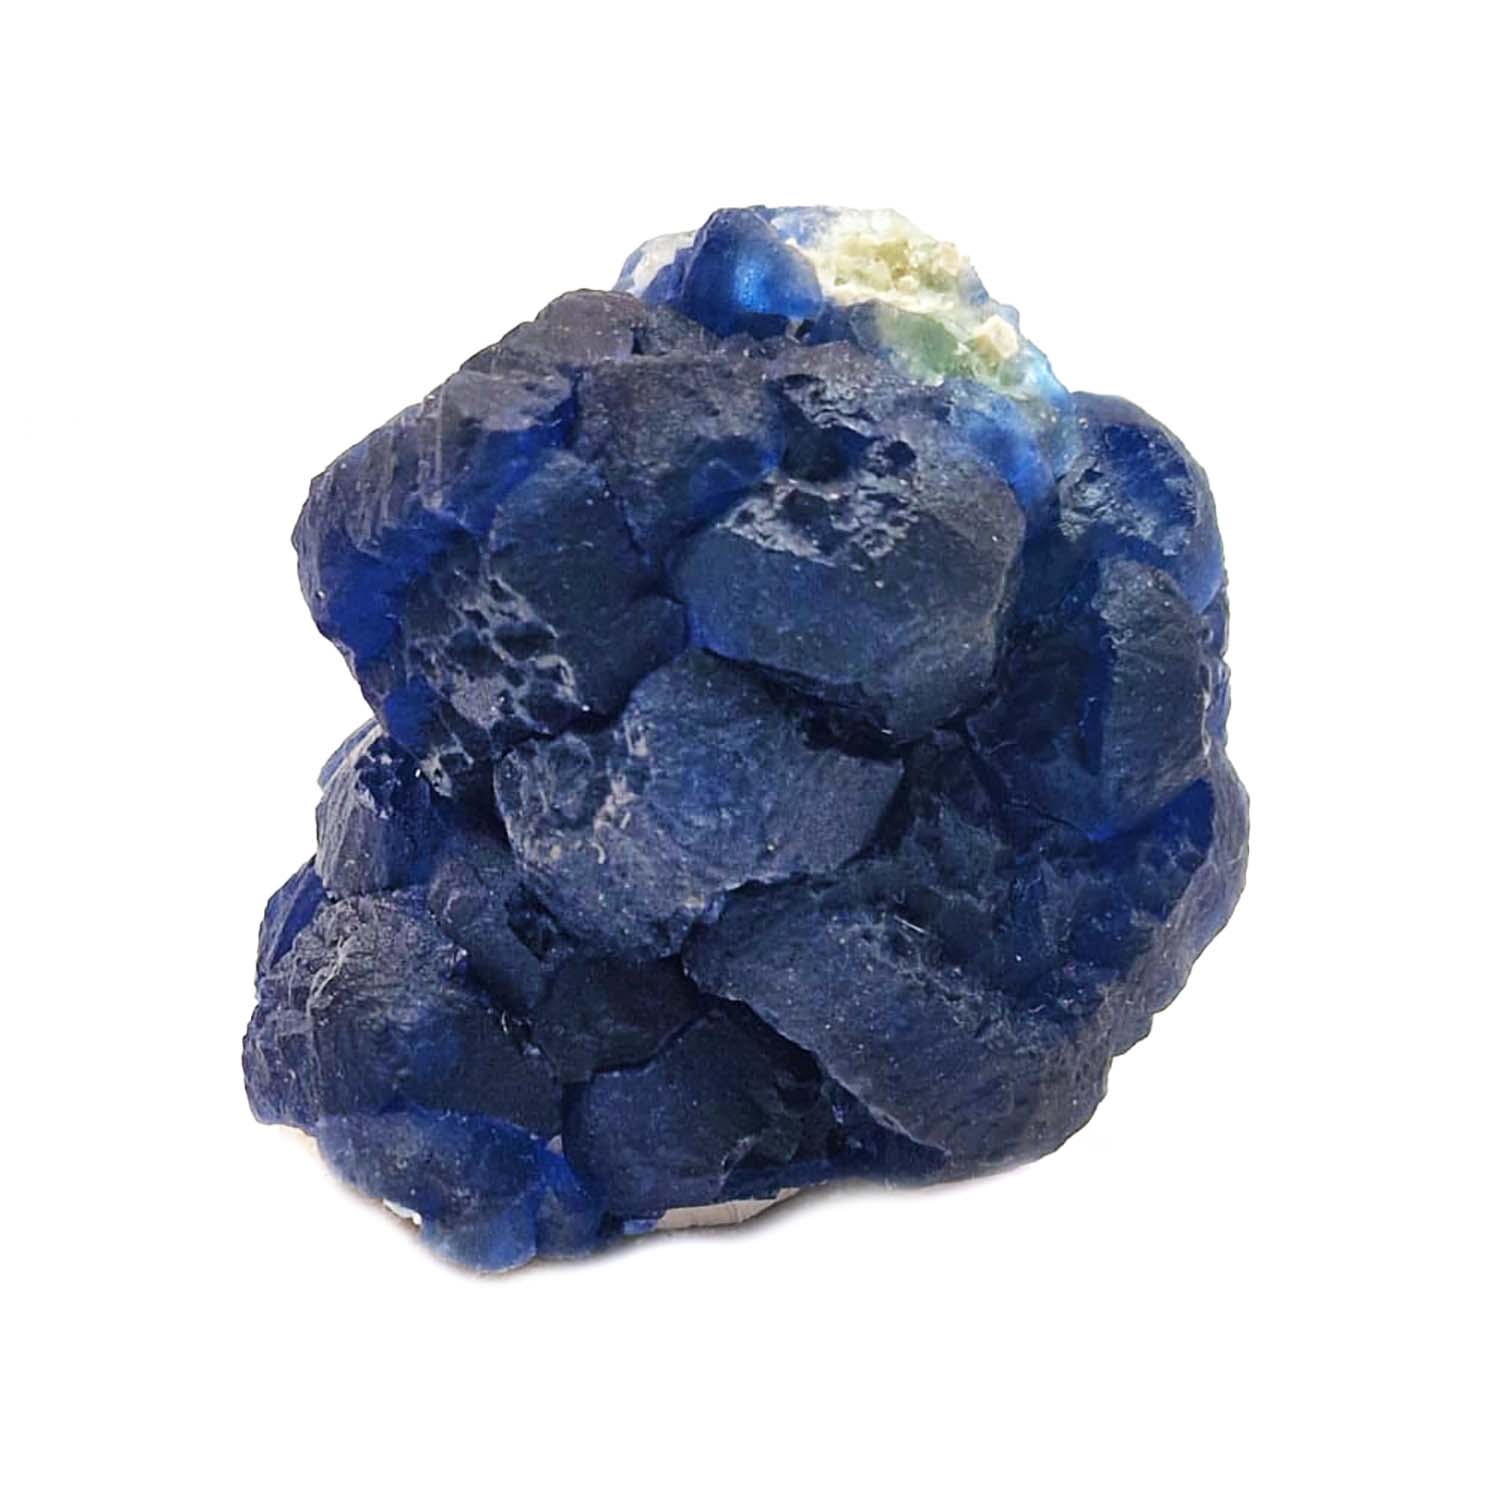 GeoFossils Blue Dodecahedral Fluorite #1 on quartz Cores.  Location | Shaft 4 Huanggang Mines, Hexigten Banner, Inner Mongolia, China